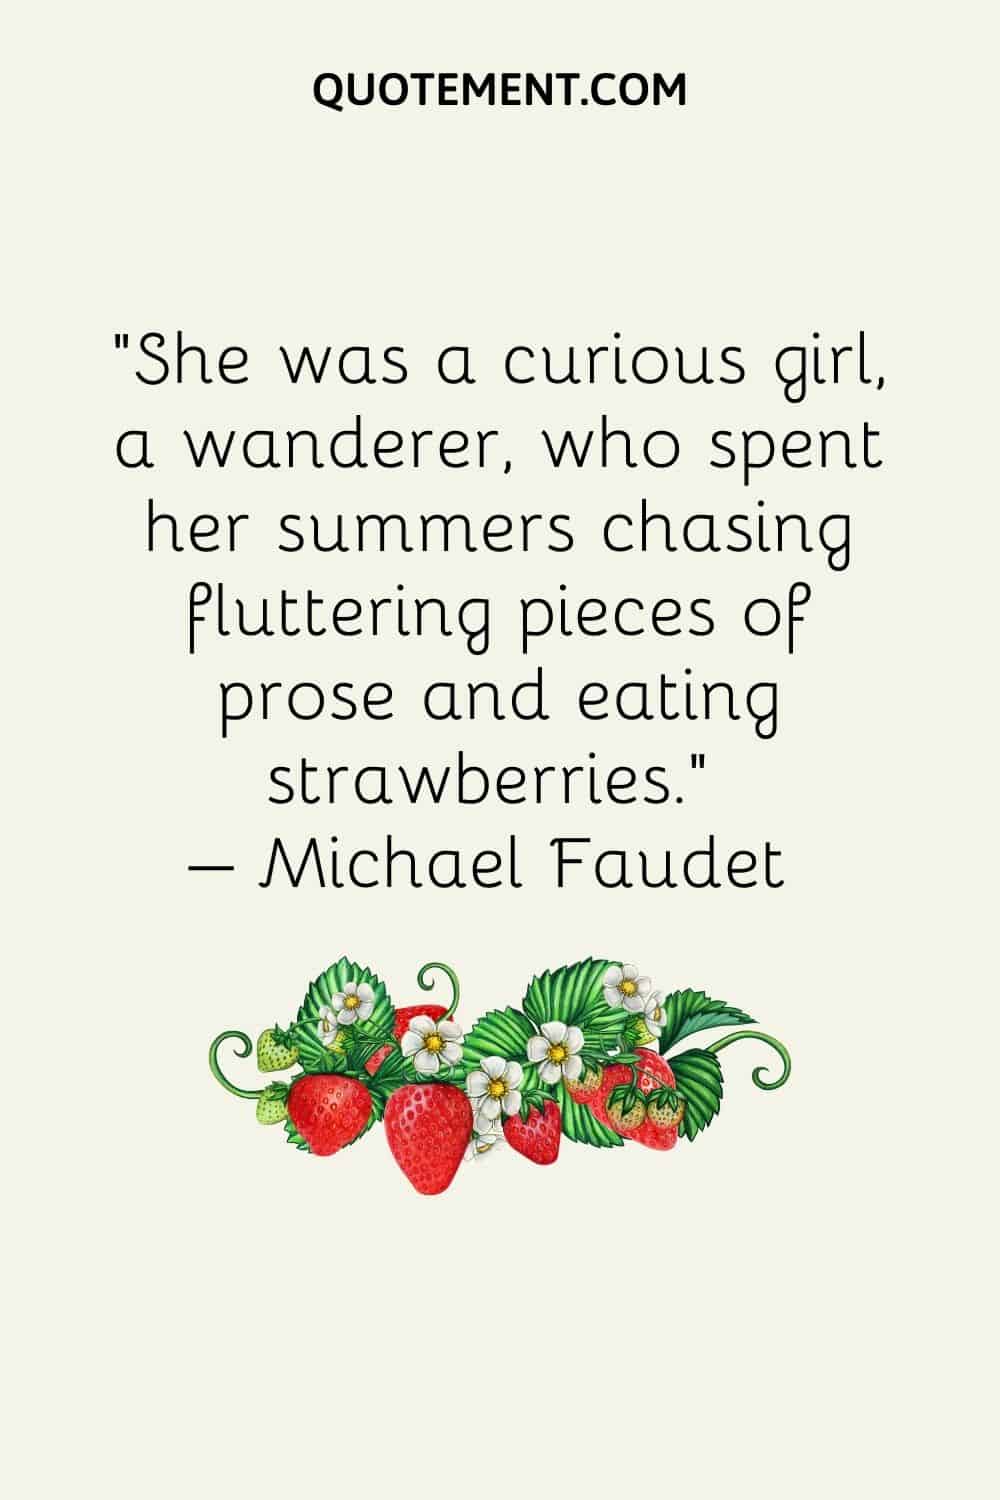 She was a curious girl, a wanderer, who spent her summers chasing fluttering pieces of prose and eating strawberries